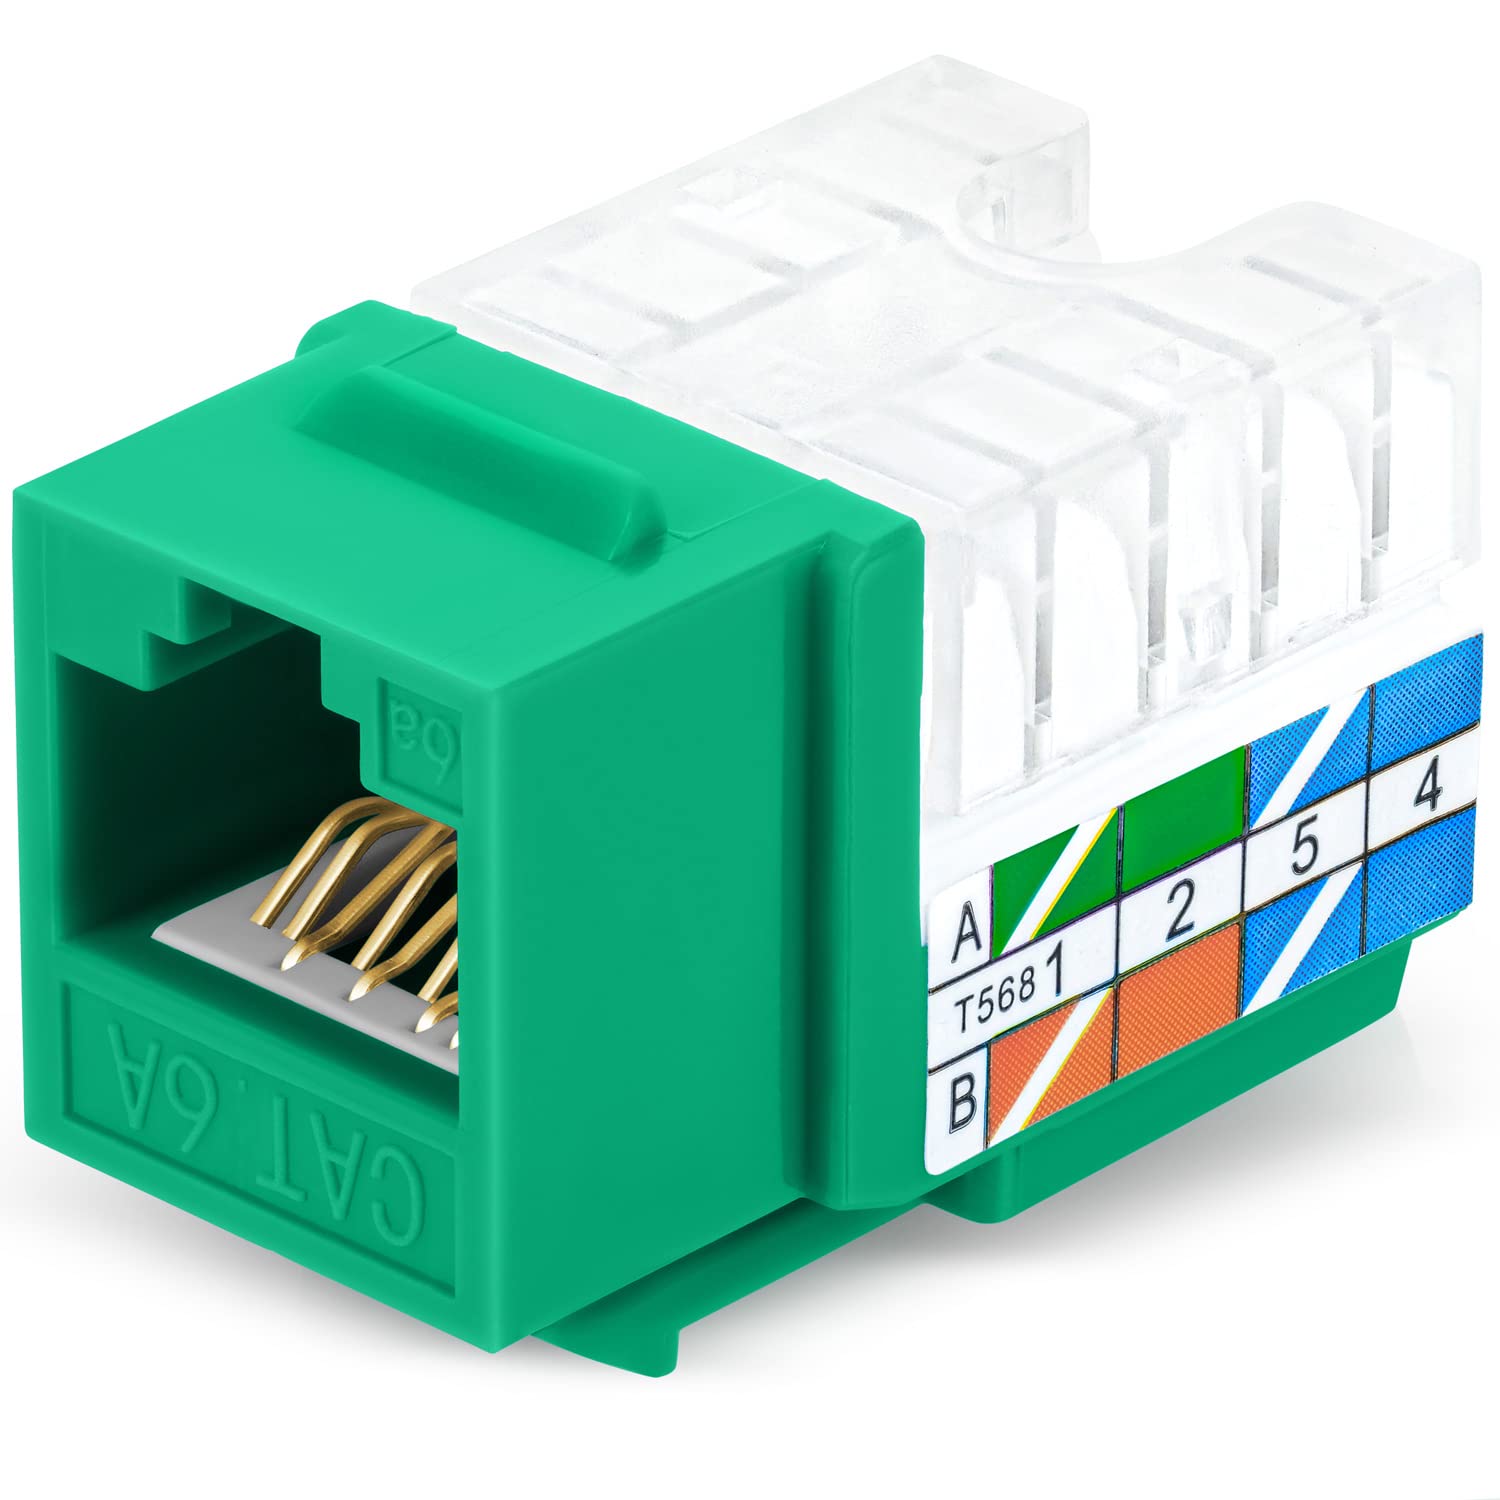 thinkstar 90° Angled Cat6A Keystone Jack In Green - Slim Profile Rj45 Ethernet Connector - Compatible With 90° Angled Speed Termin…